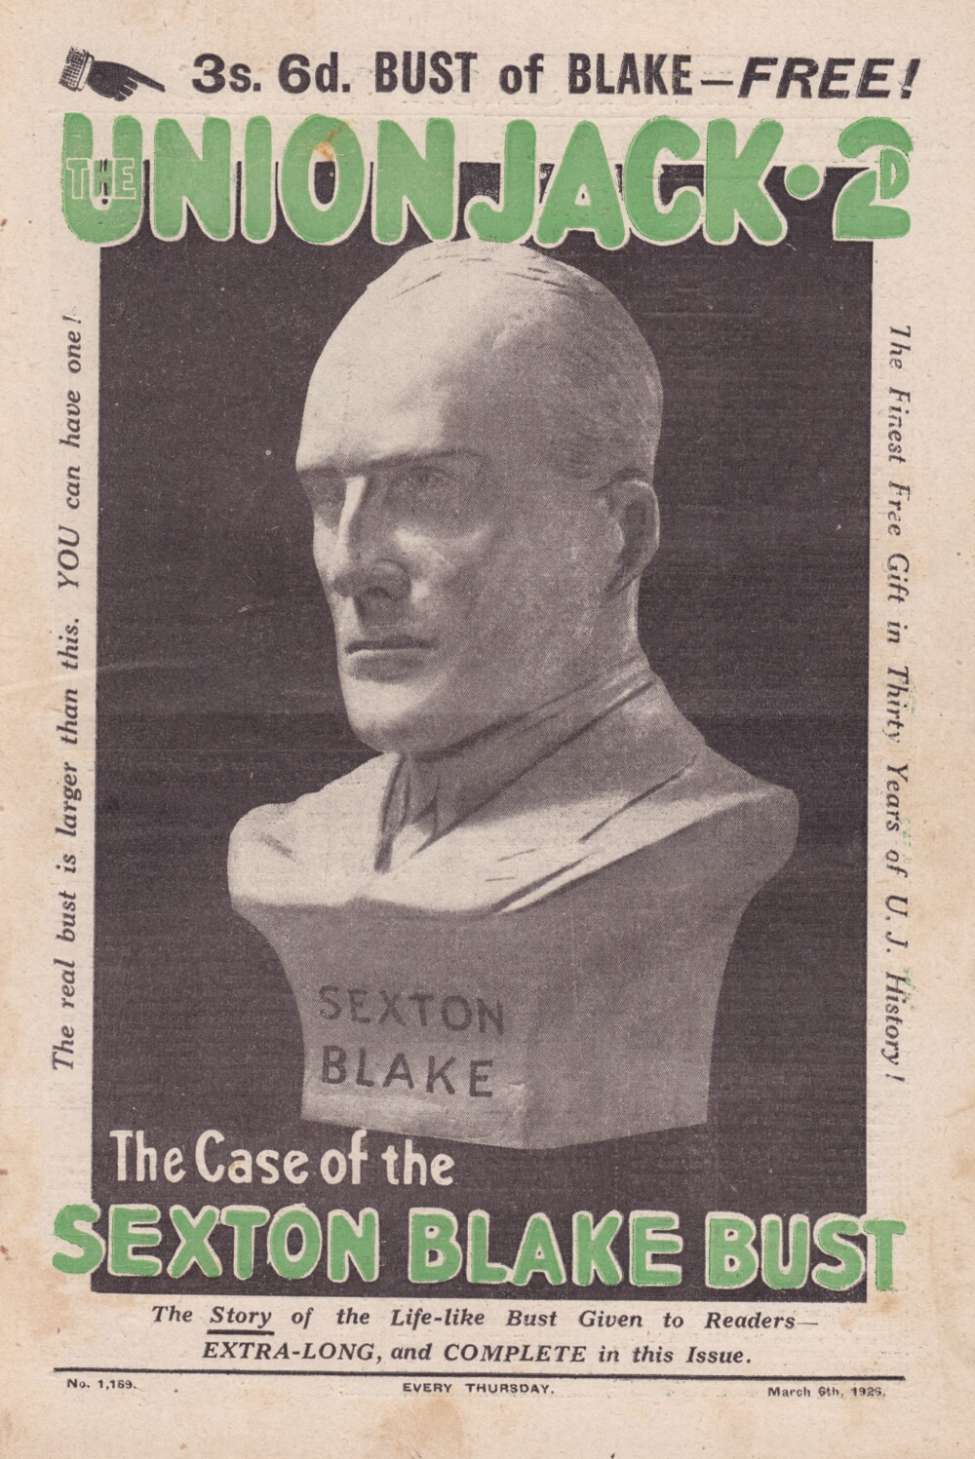 Comic Book Cover For Union Jack 1169 - The Case of the Sexton Blake Bust